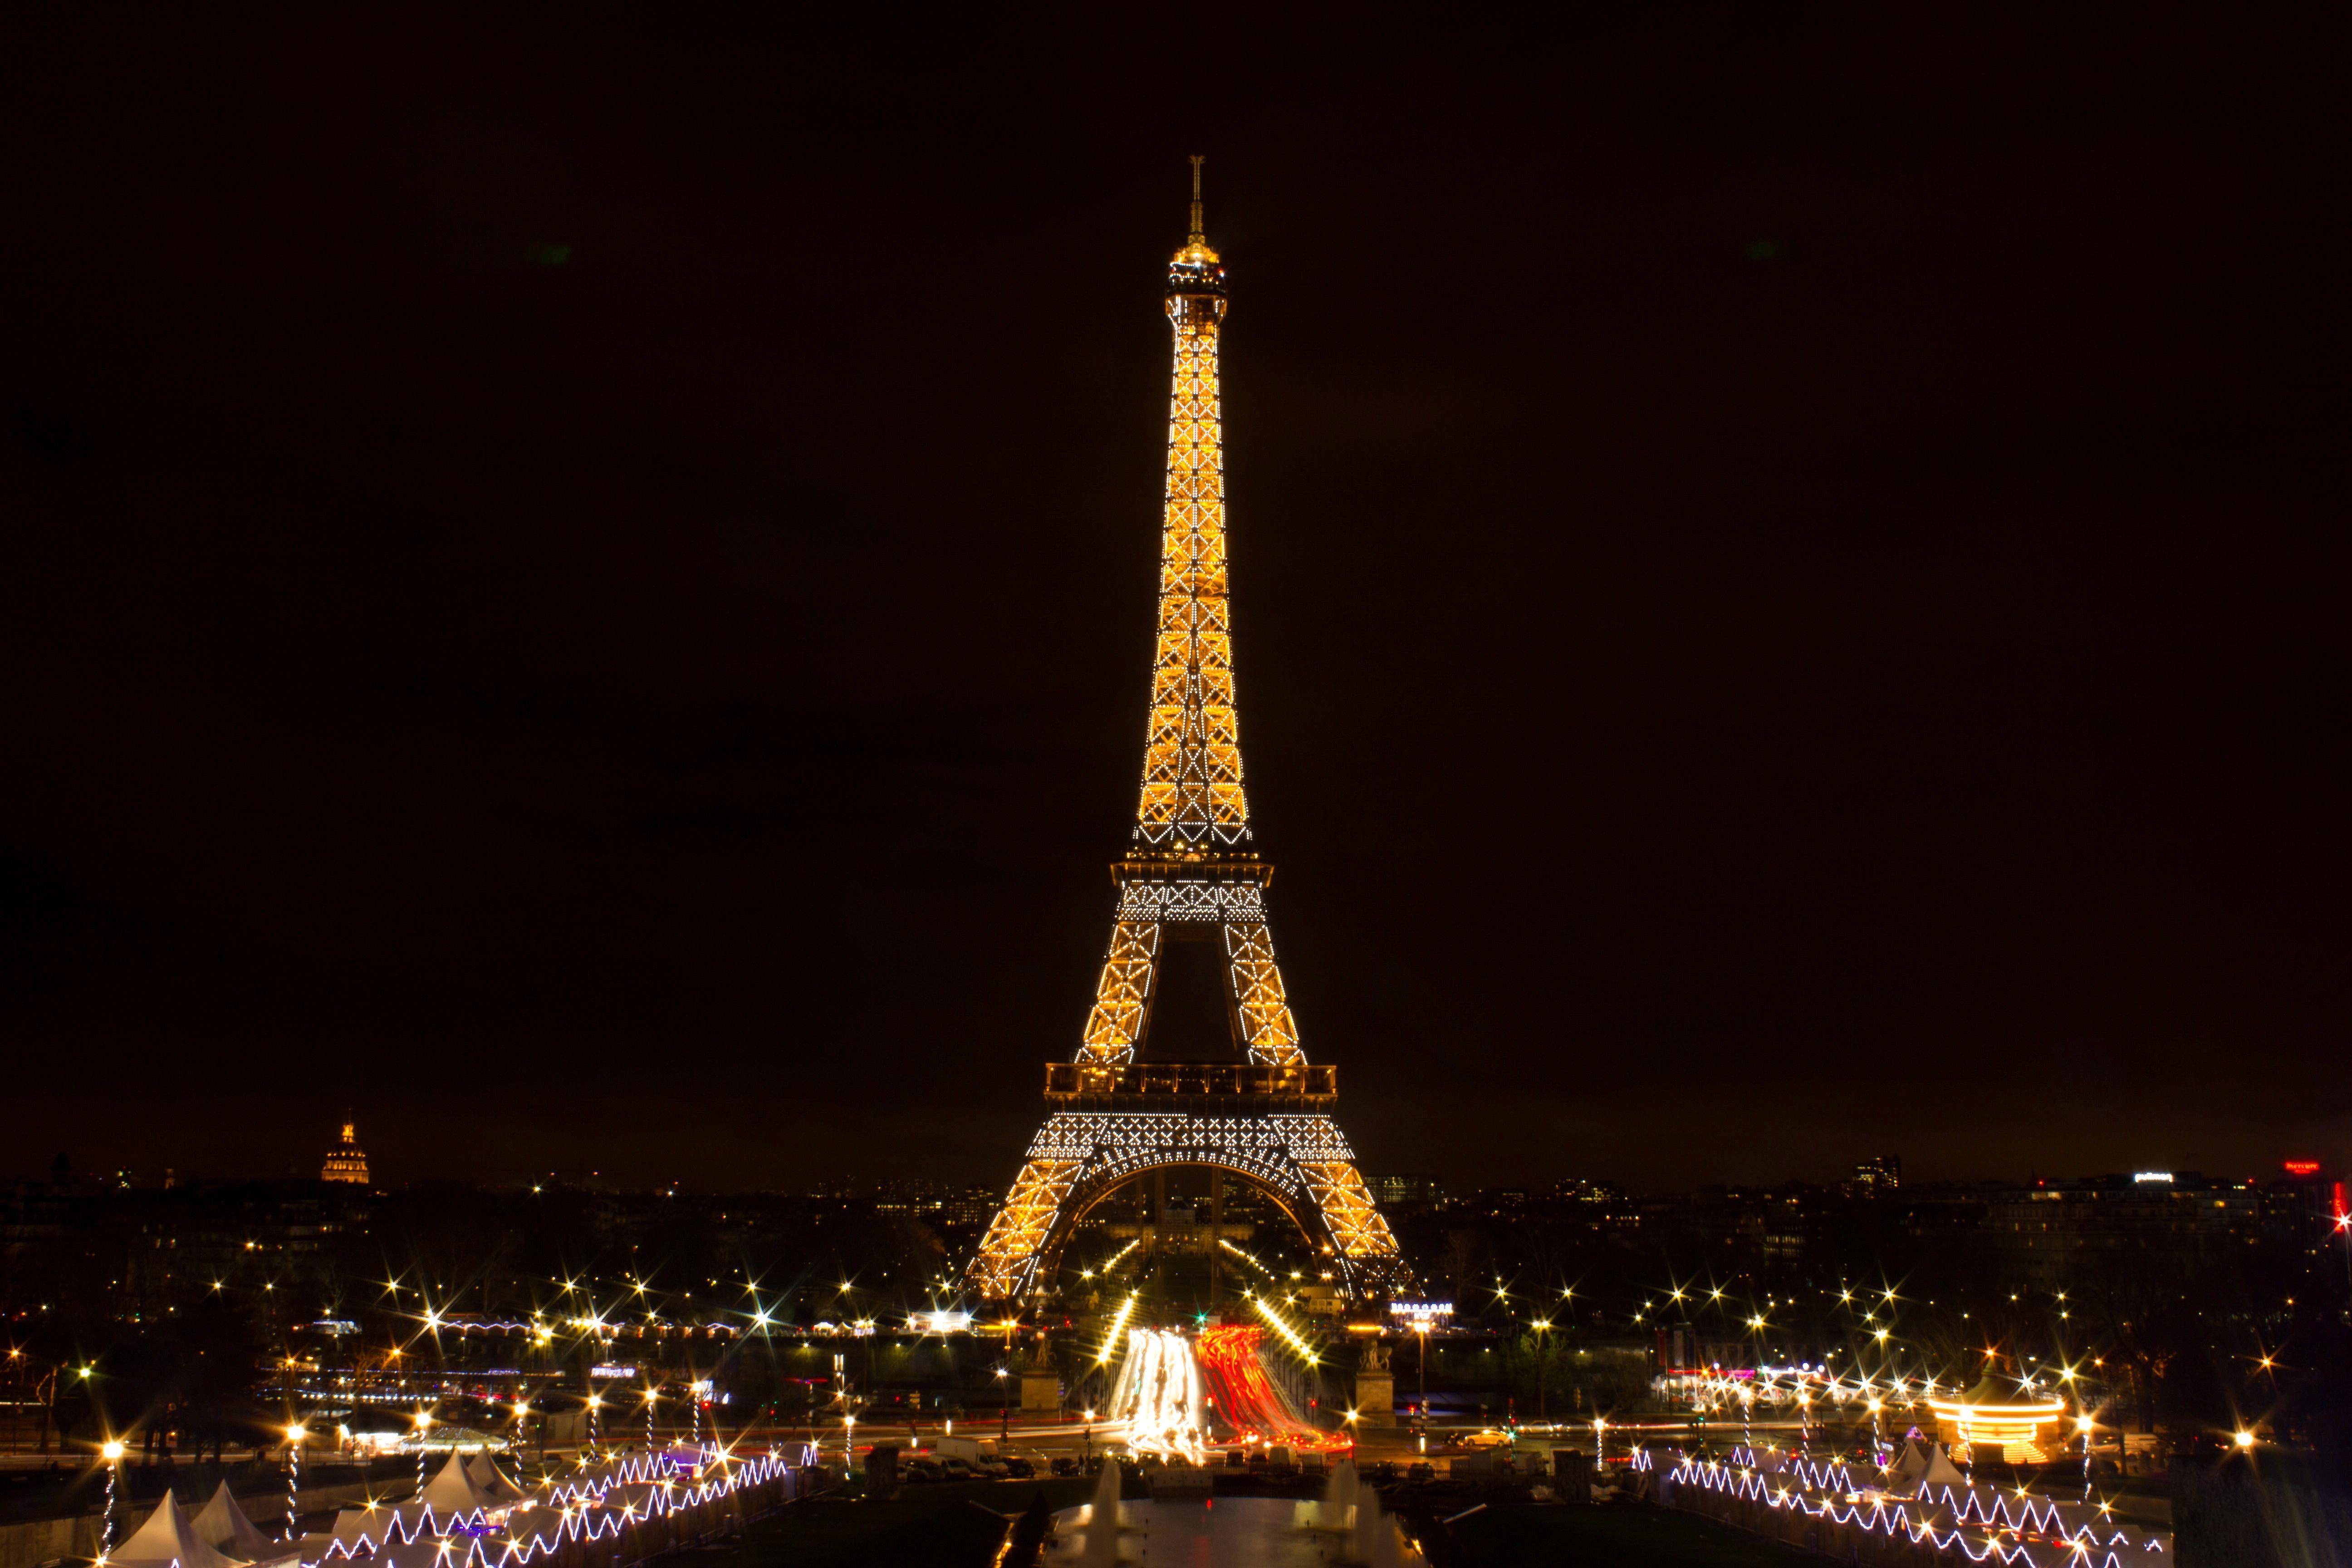 Eiffel Tower HD Wallpaper Image Picture Photo Download